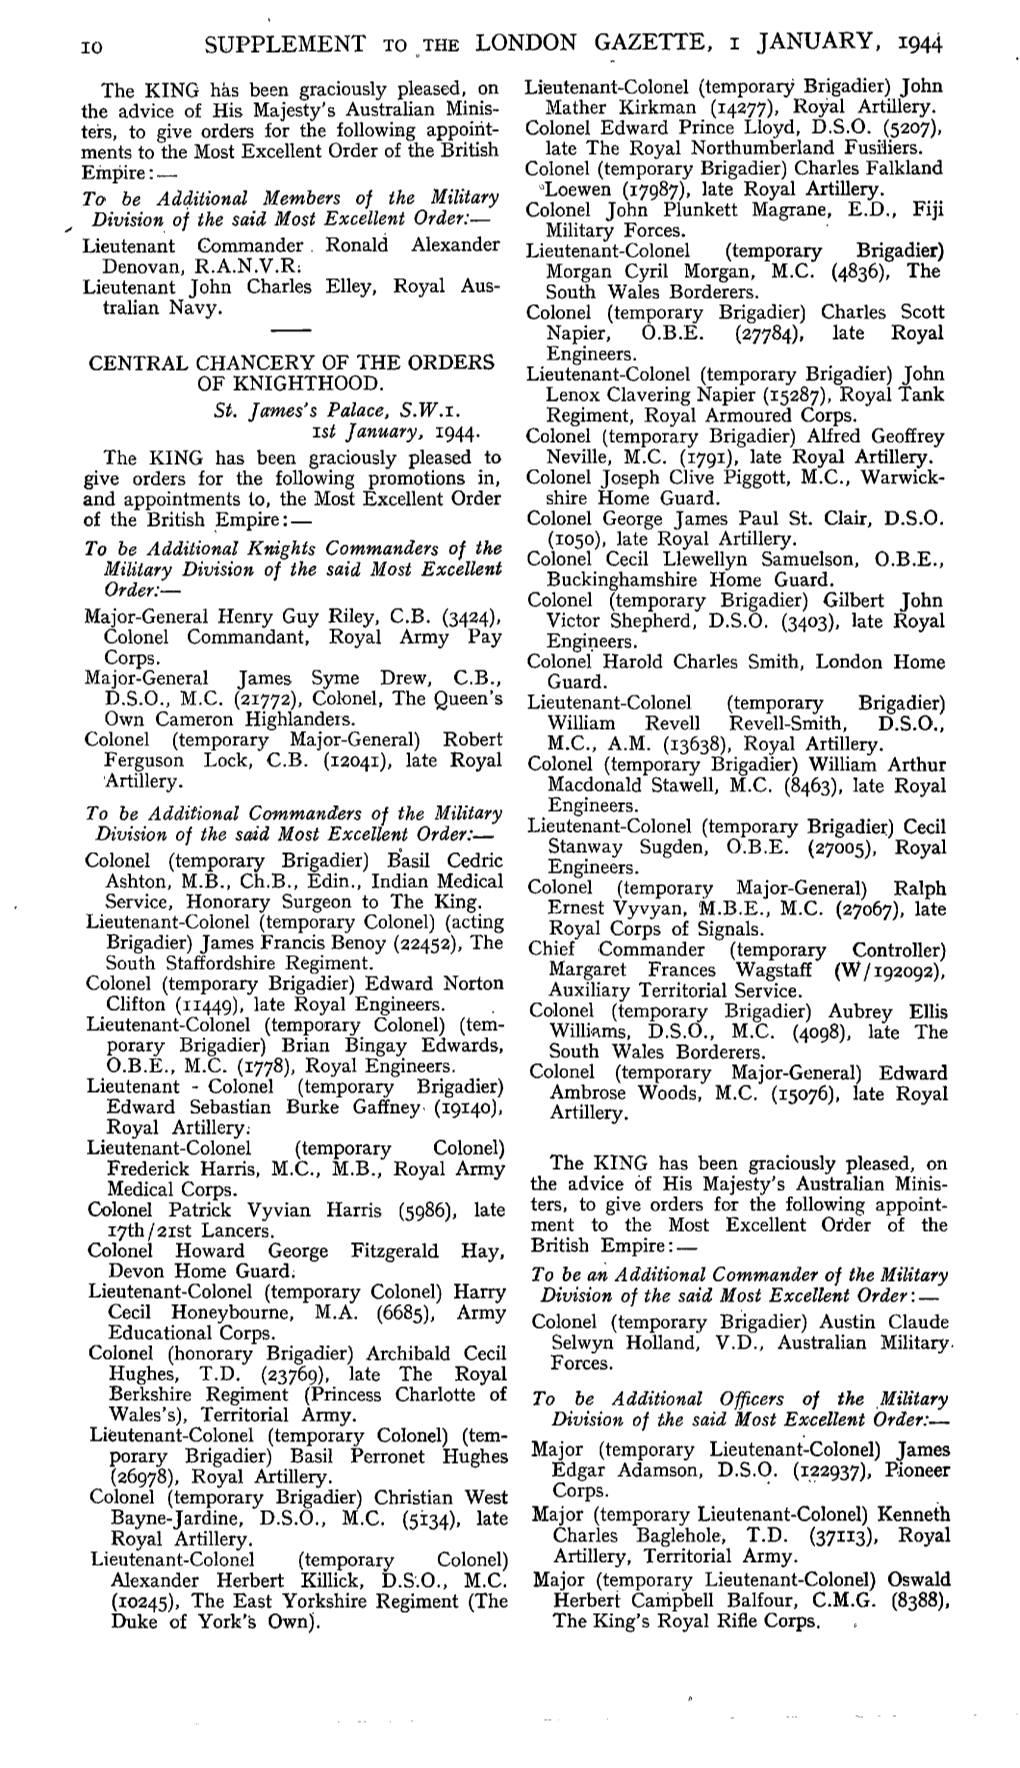 SUPPLEMENT to the LONDON GAZETTE, I JANUARY, 1944